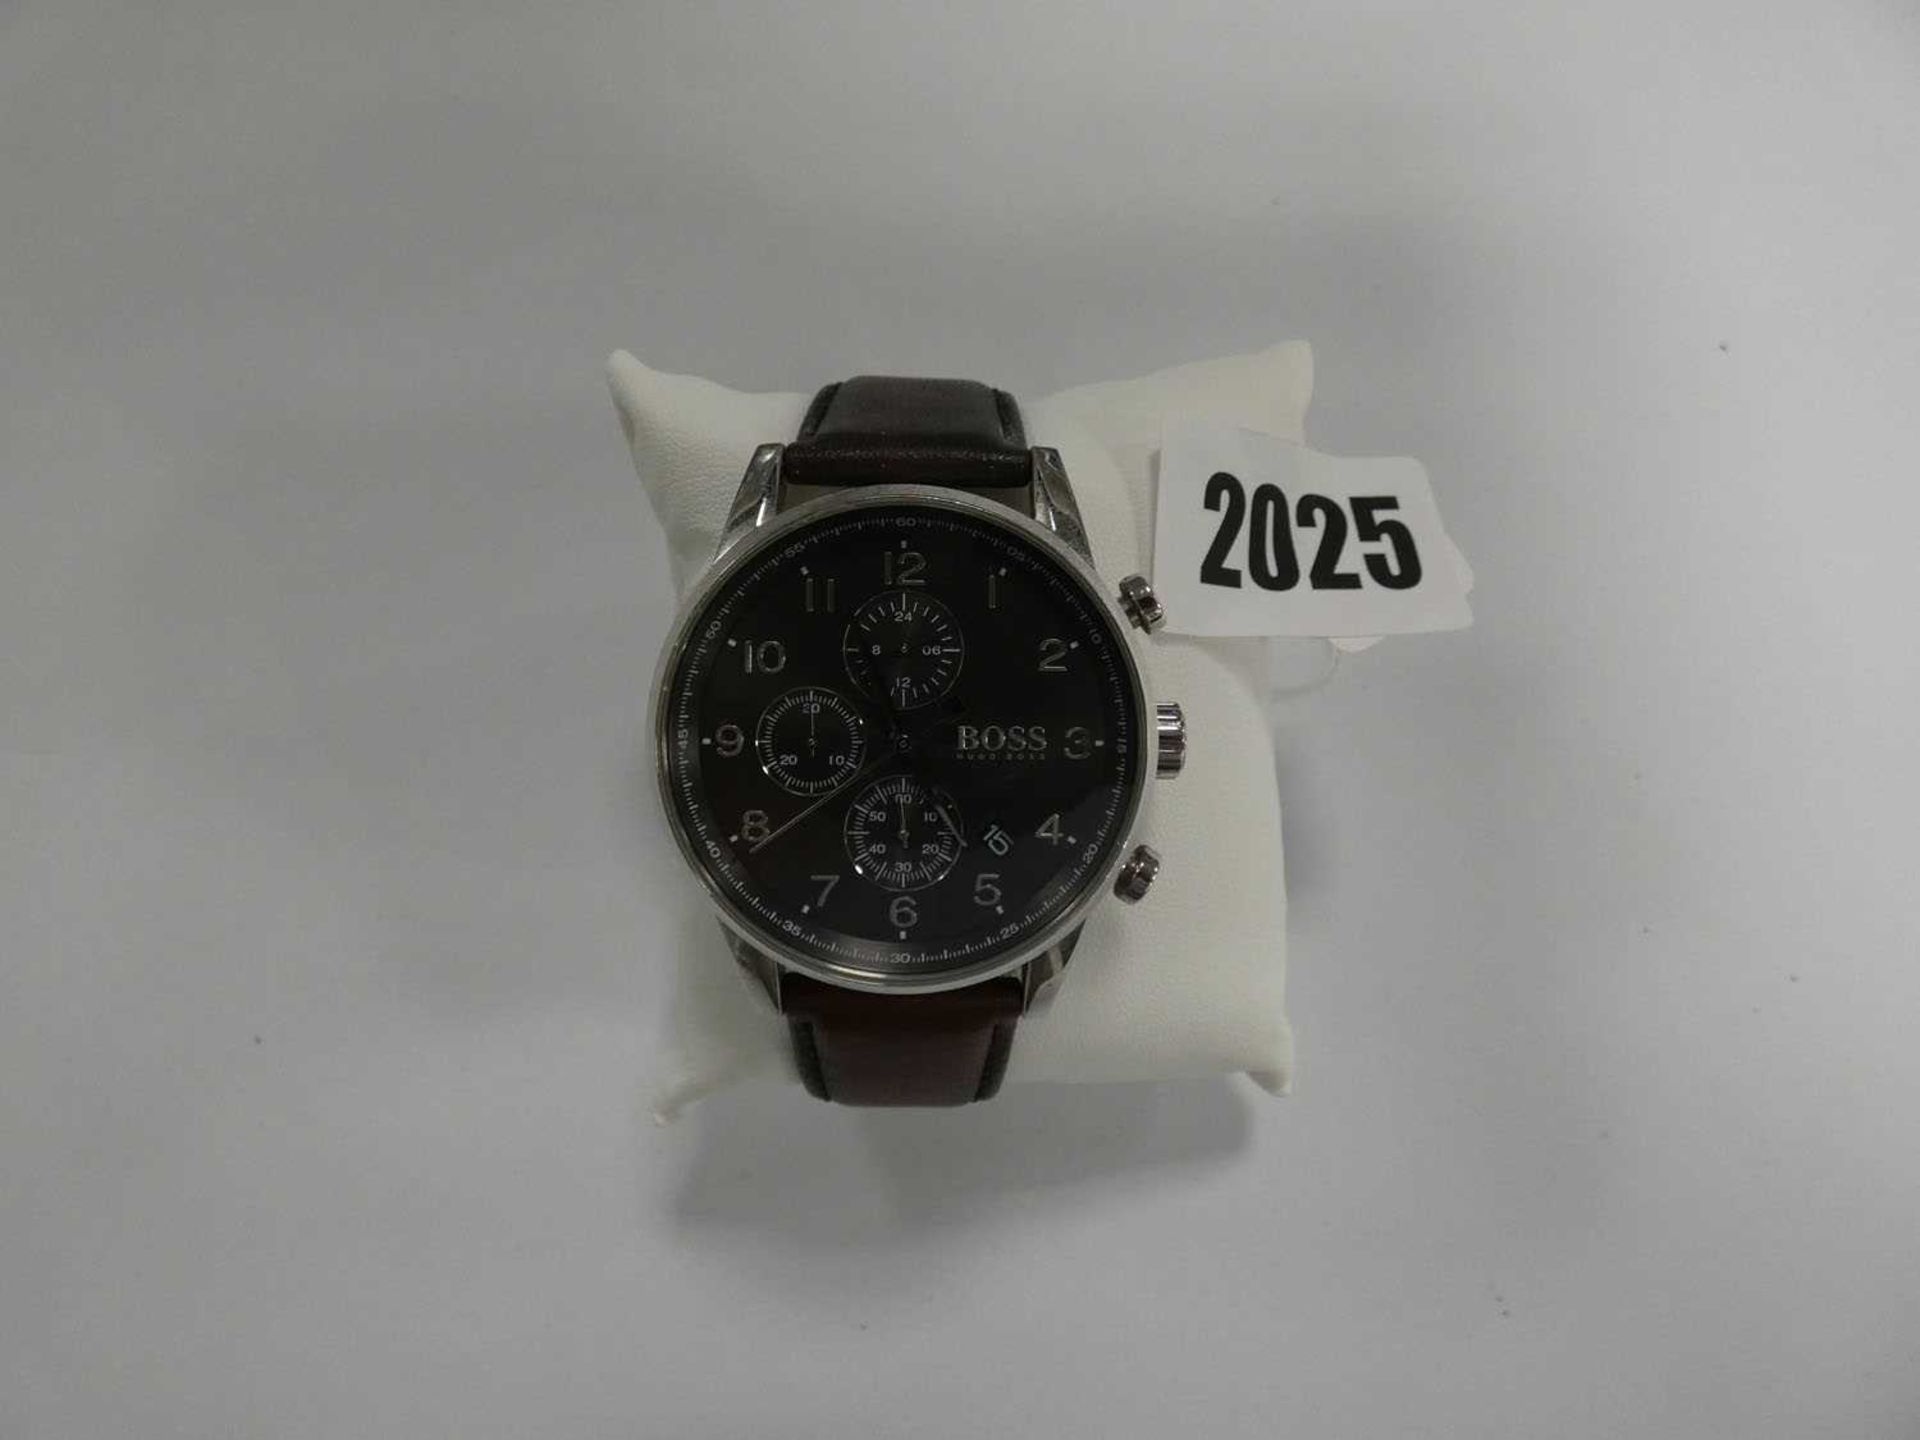 Gents stainless steel Hugo Boss chronograph quartz watch with date and black Arabic dial, leather